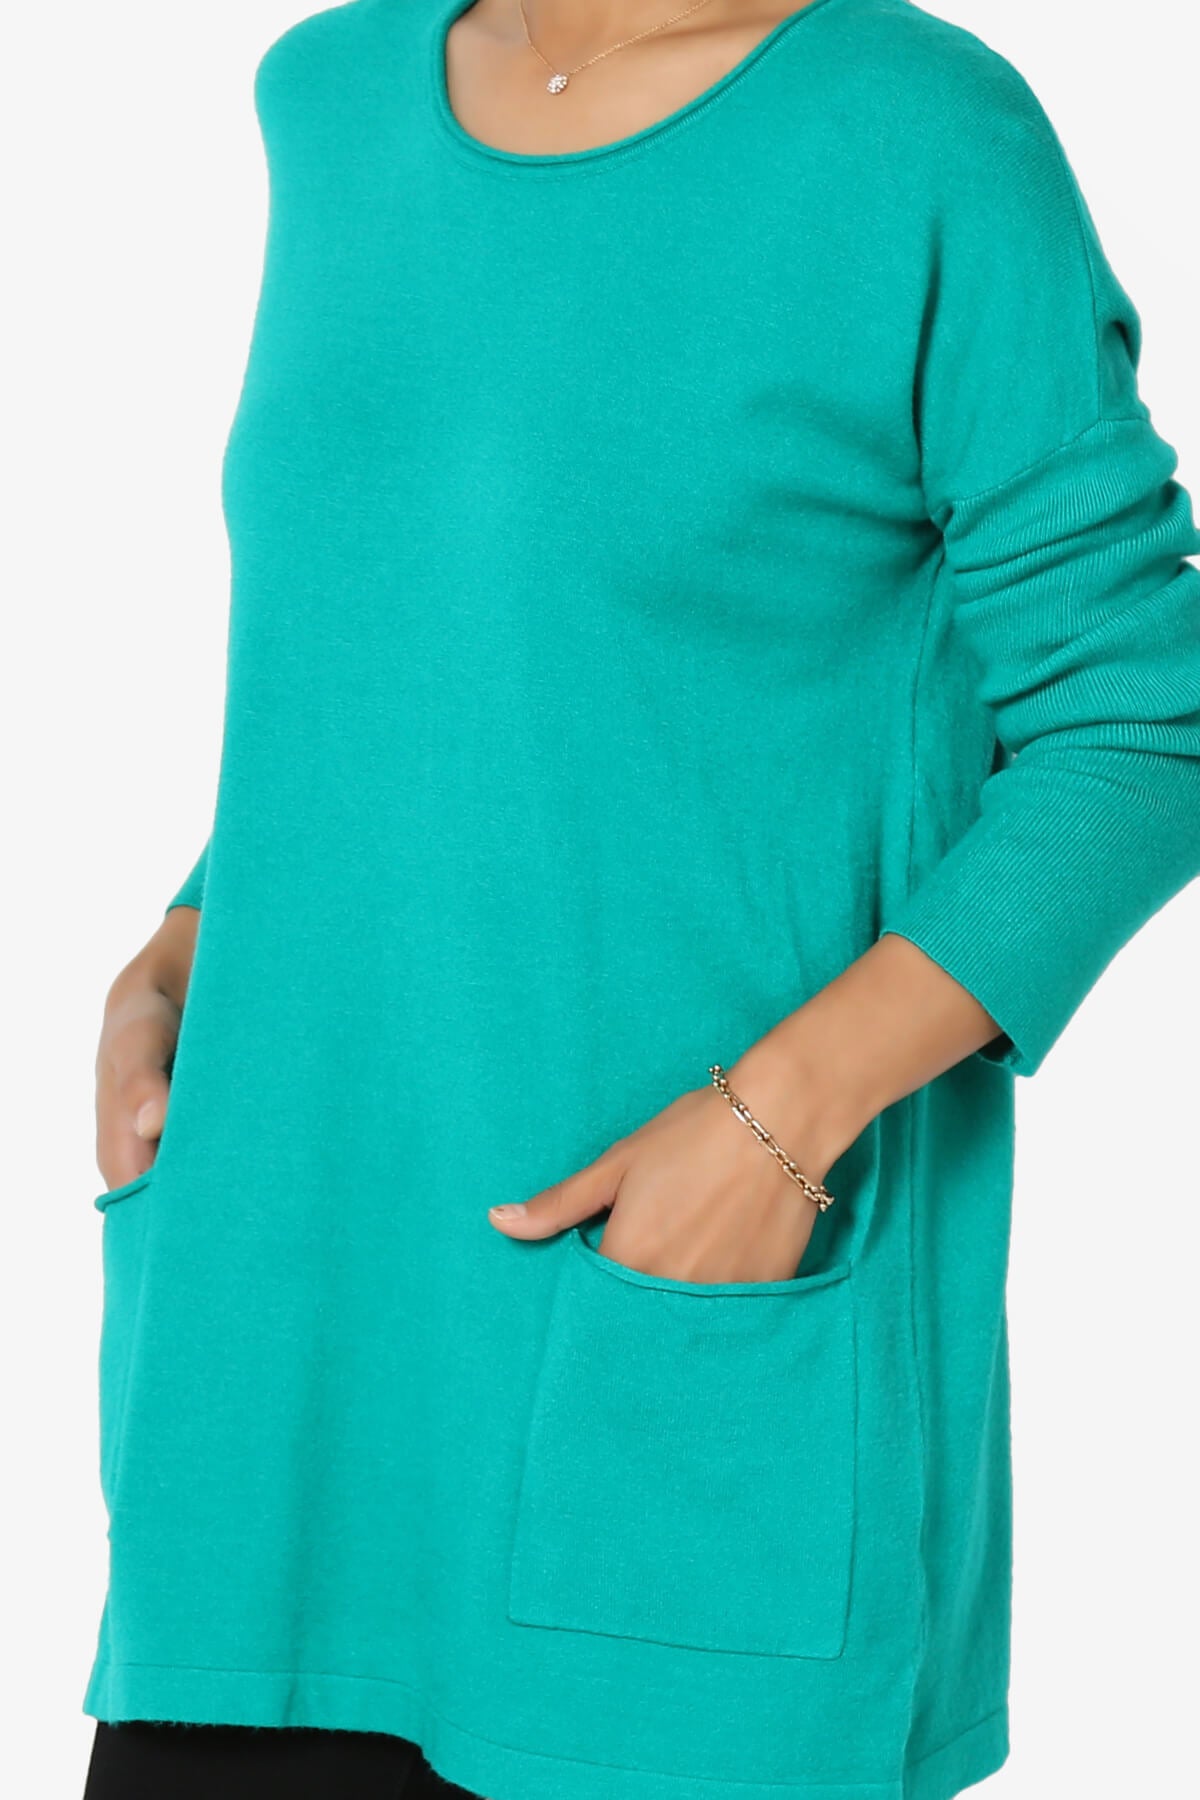 Brecken Pocket Long Sleeve Soft Knit Sweater Tunic TURQUOISE_5